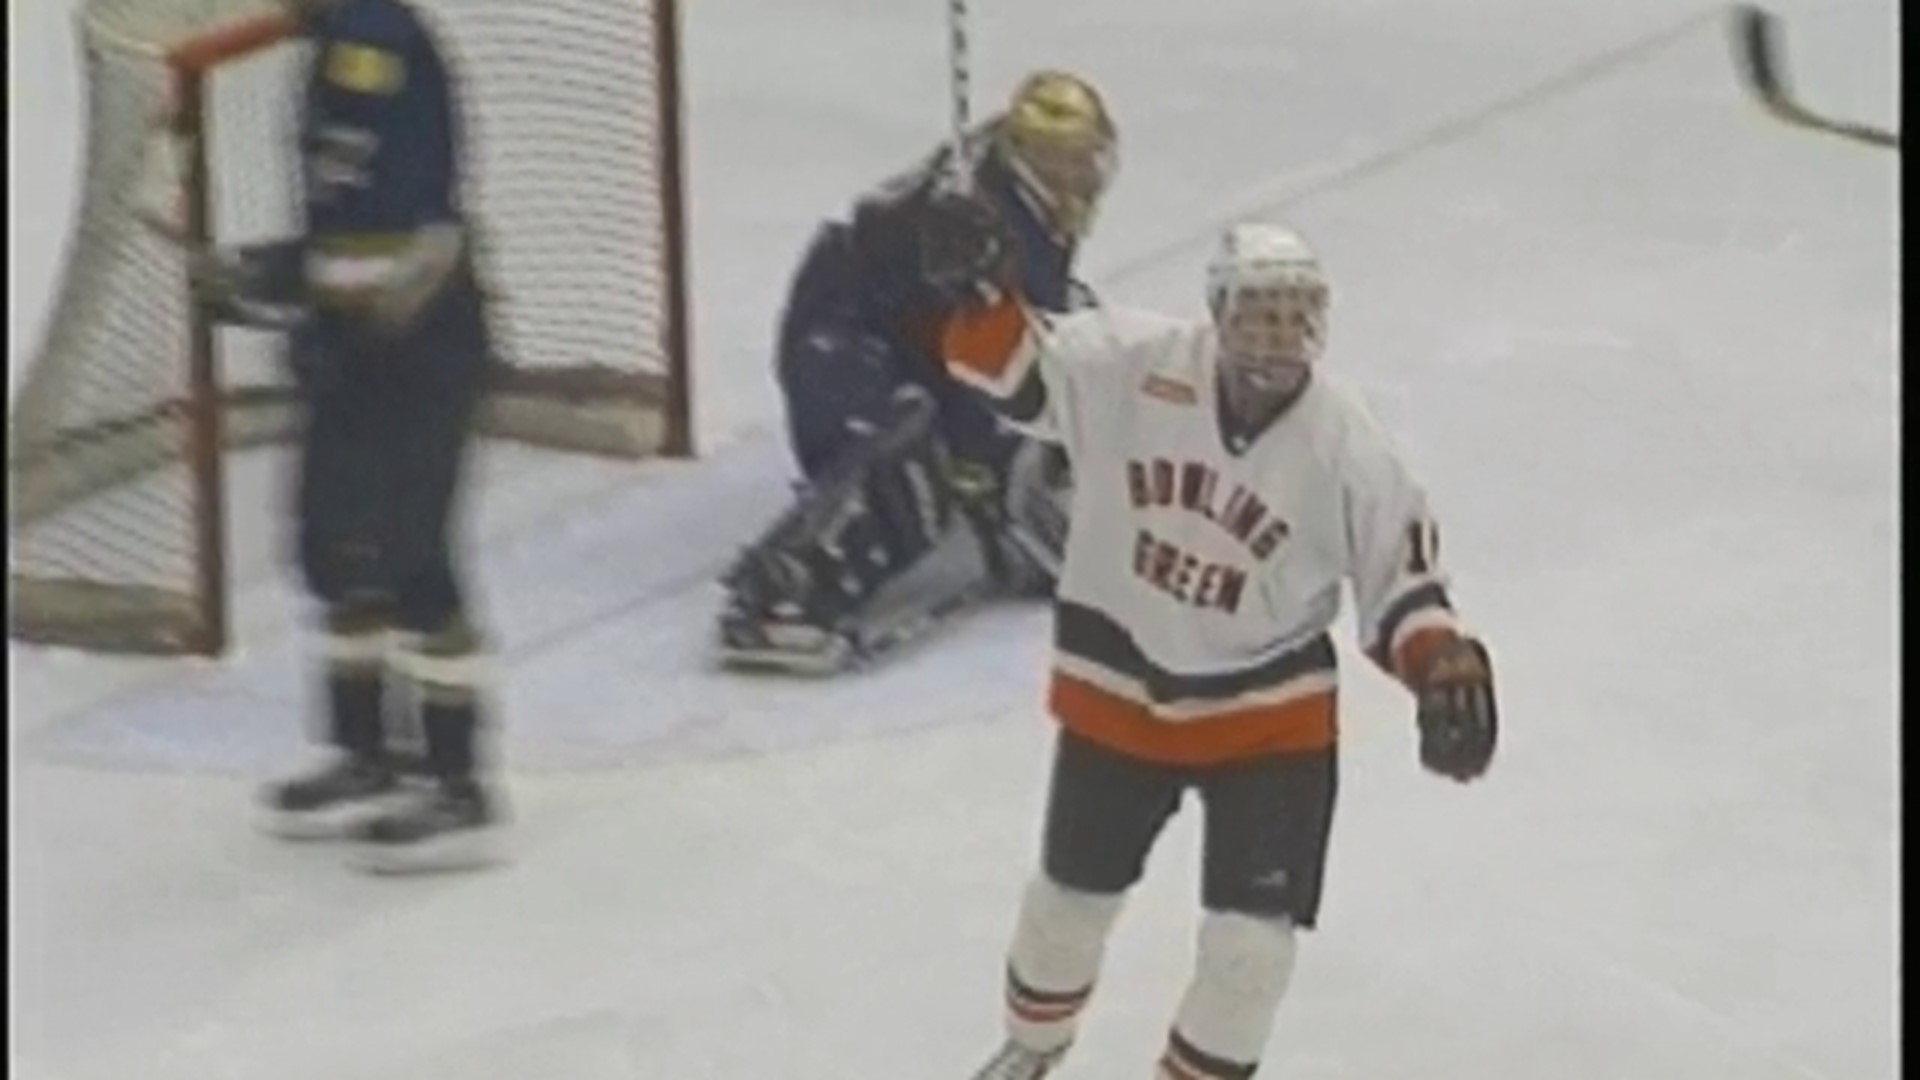 A look back at highlights and post-game reaction from the Feb. 18, 2000, hockey game between the Bowling Green Falcons and Notre Dame Fighting Irish.